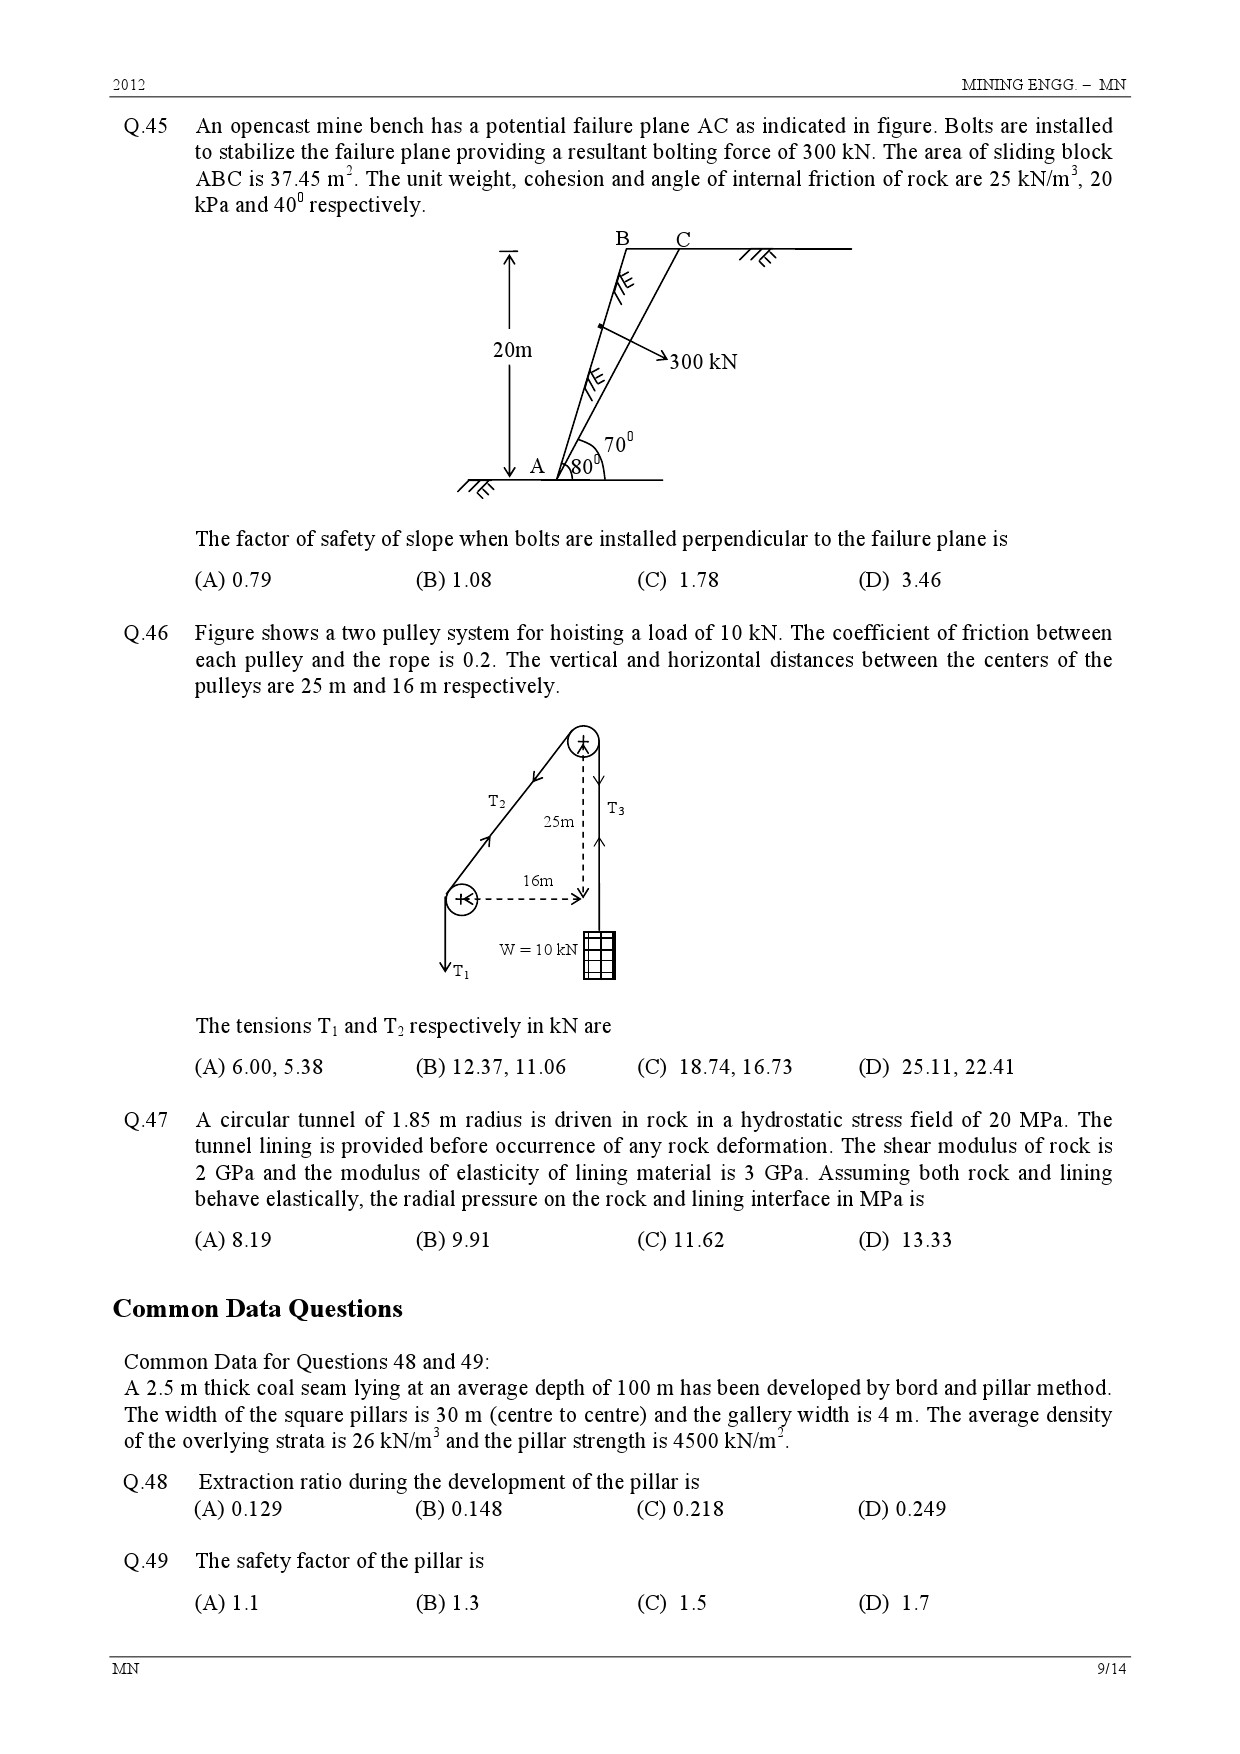 GATE Exam Question Paper 2012 Mining Engineering 9